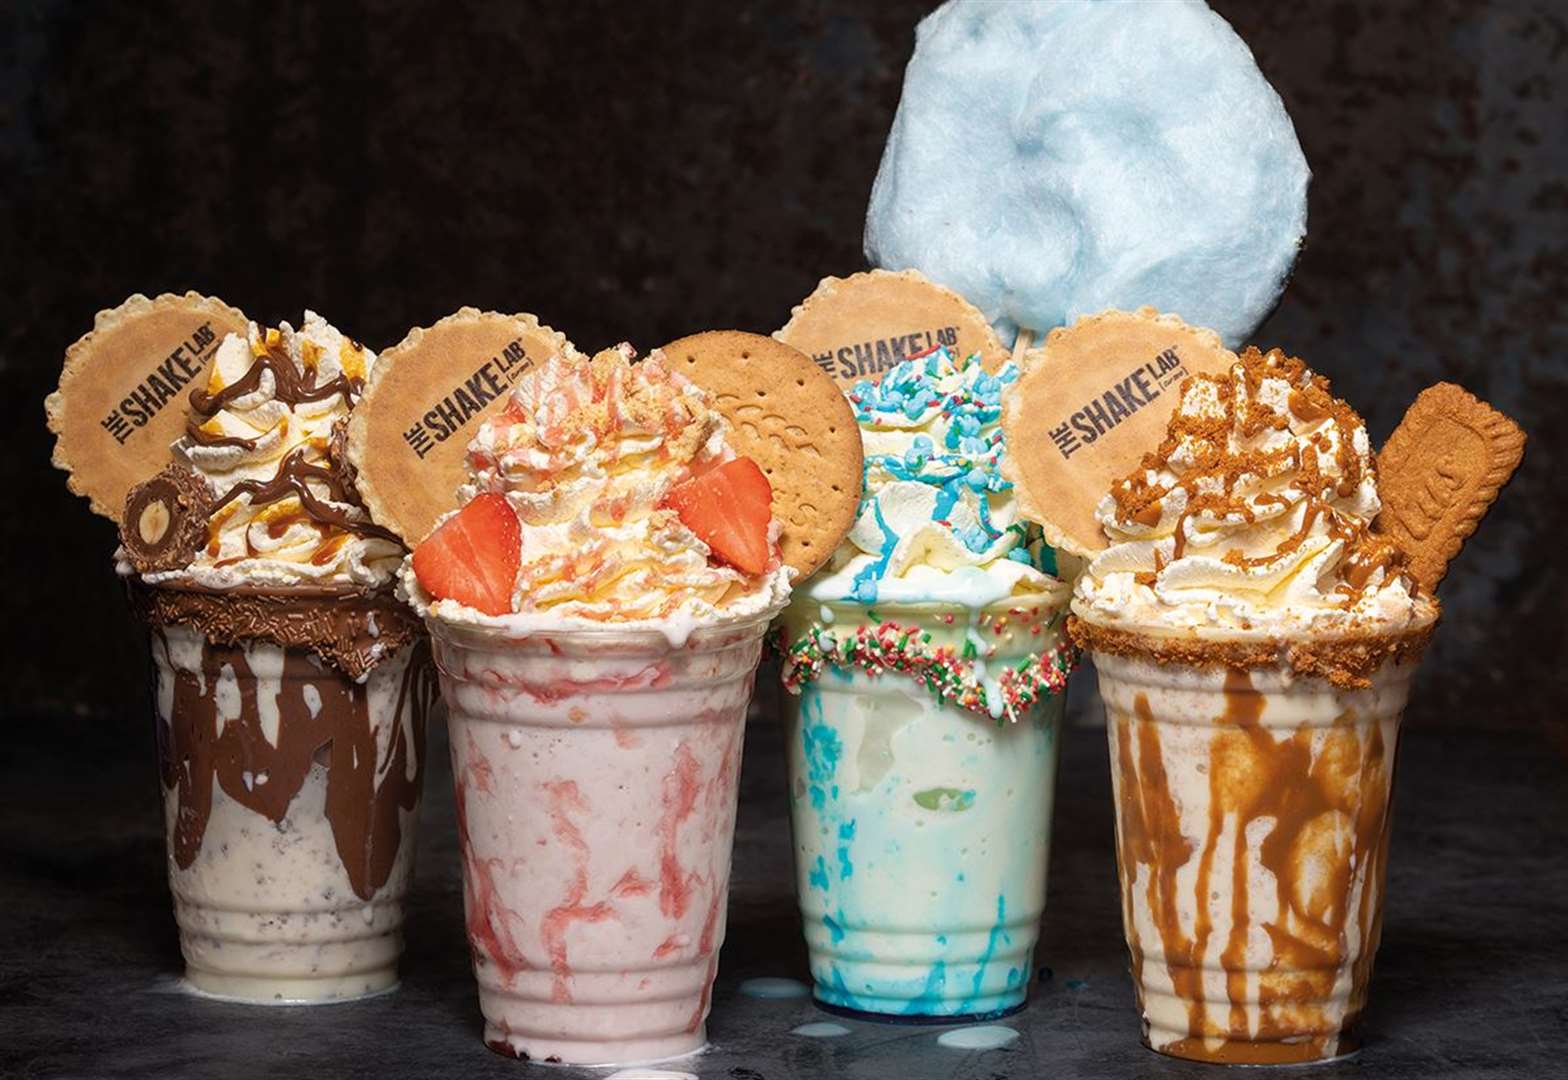 Shake shop opens at Bluewater